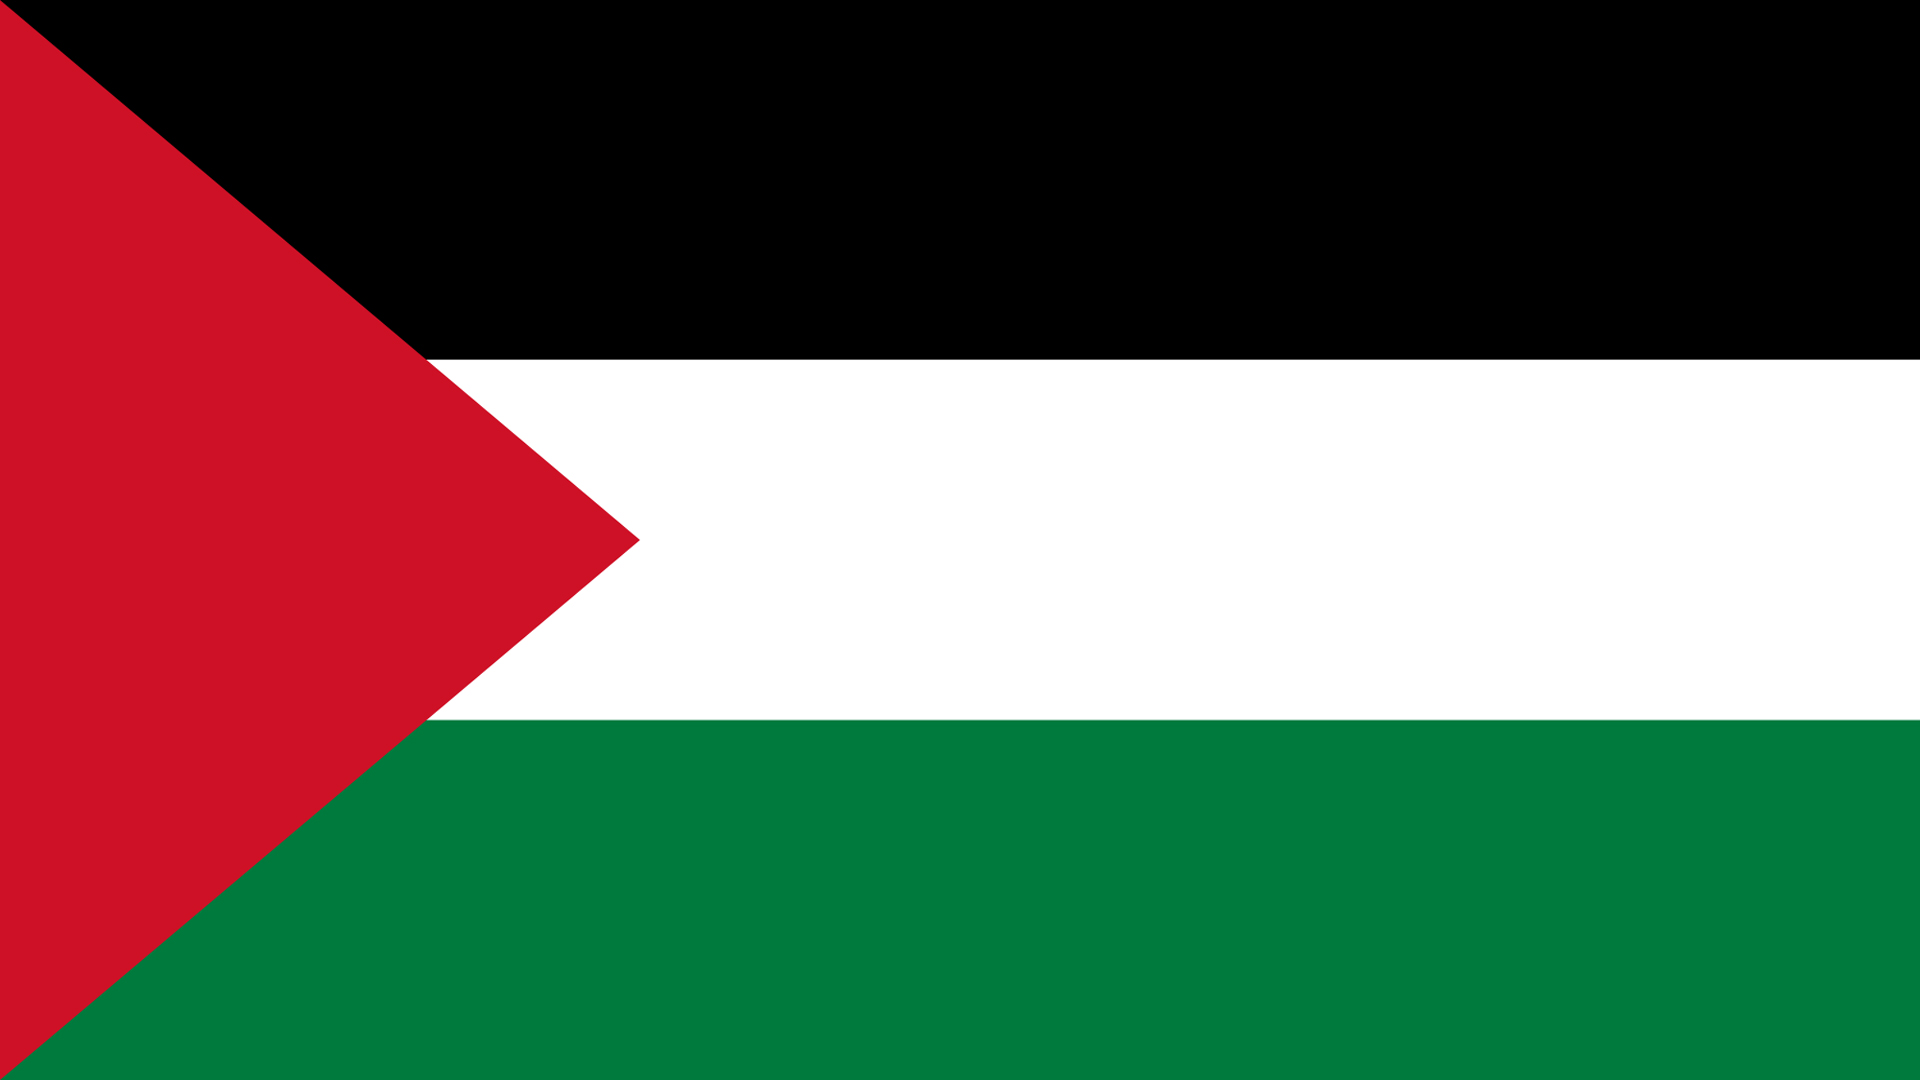 Palestine Flag Wallpaper High Definition Quality Widescreen